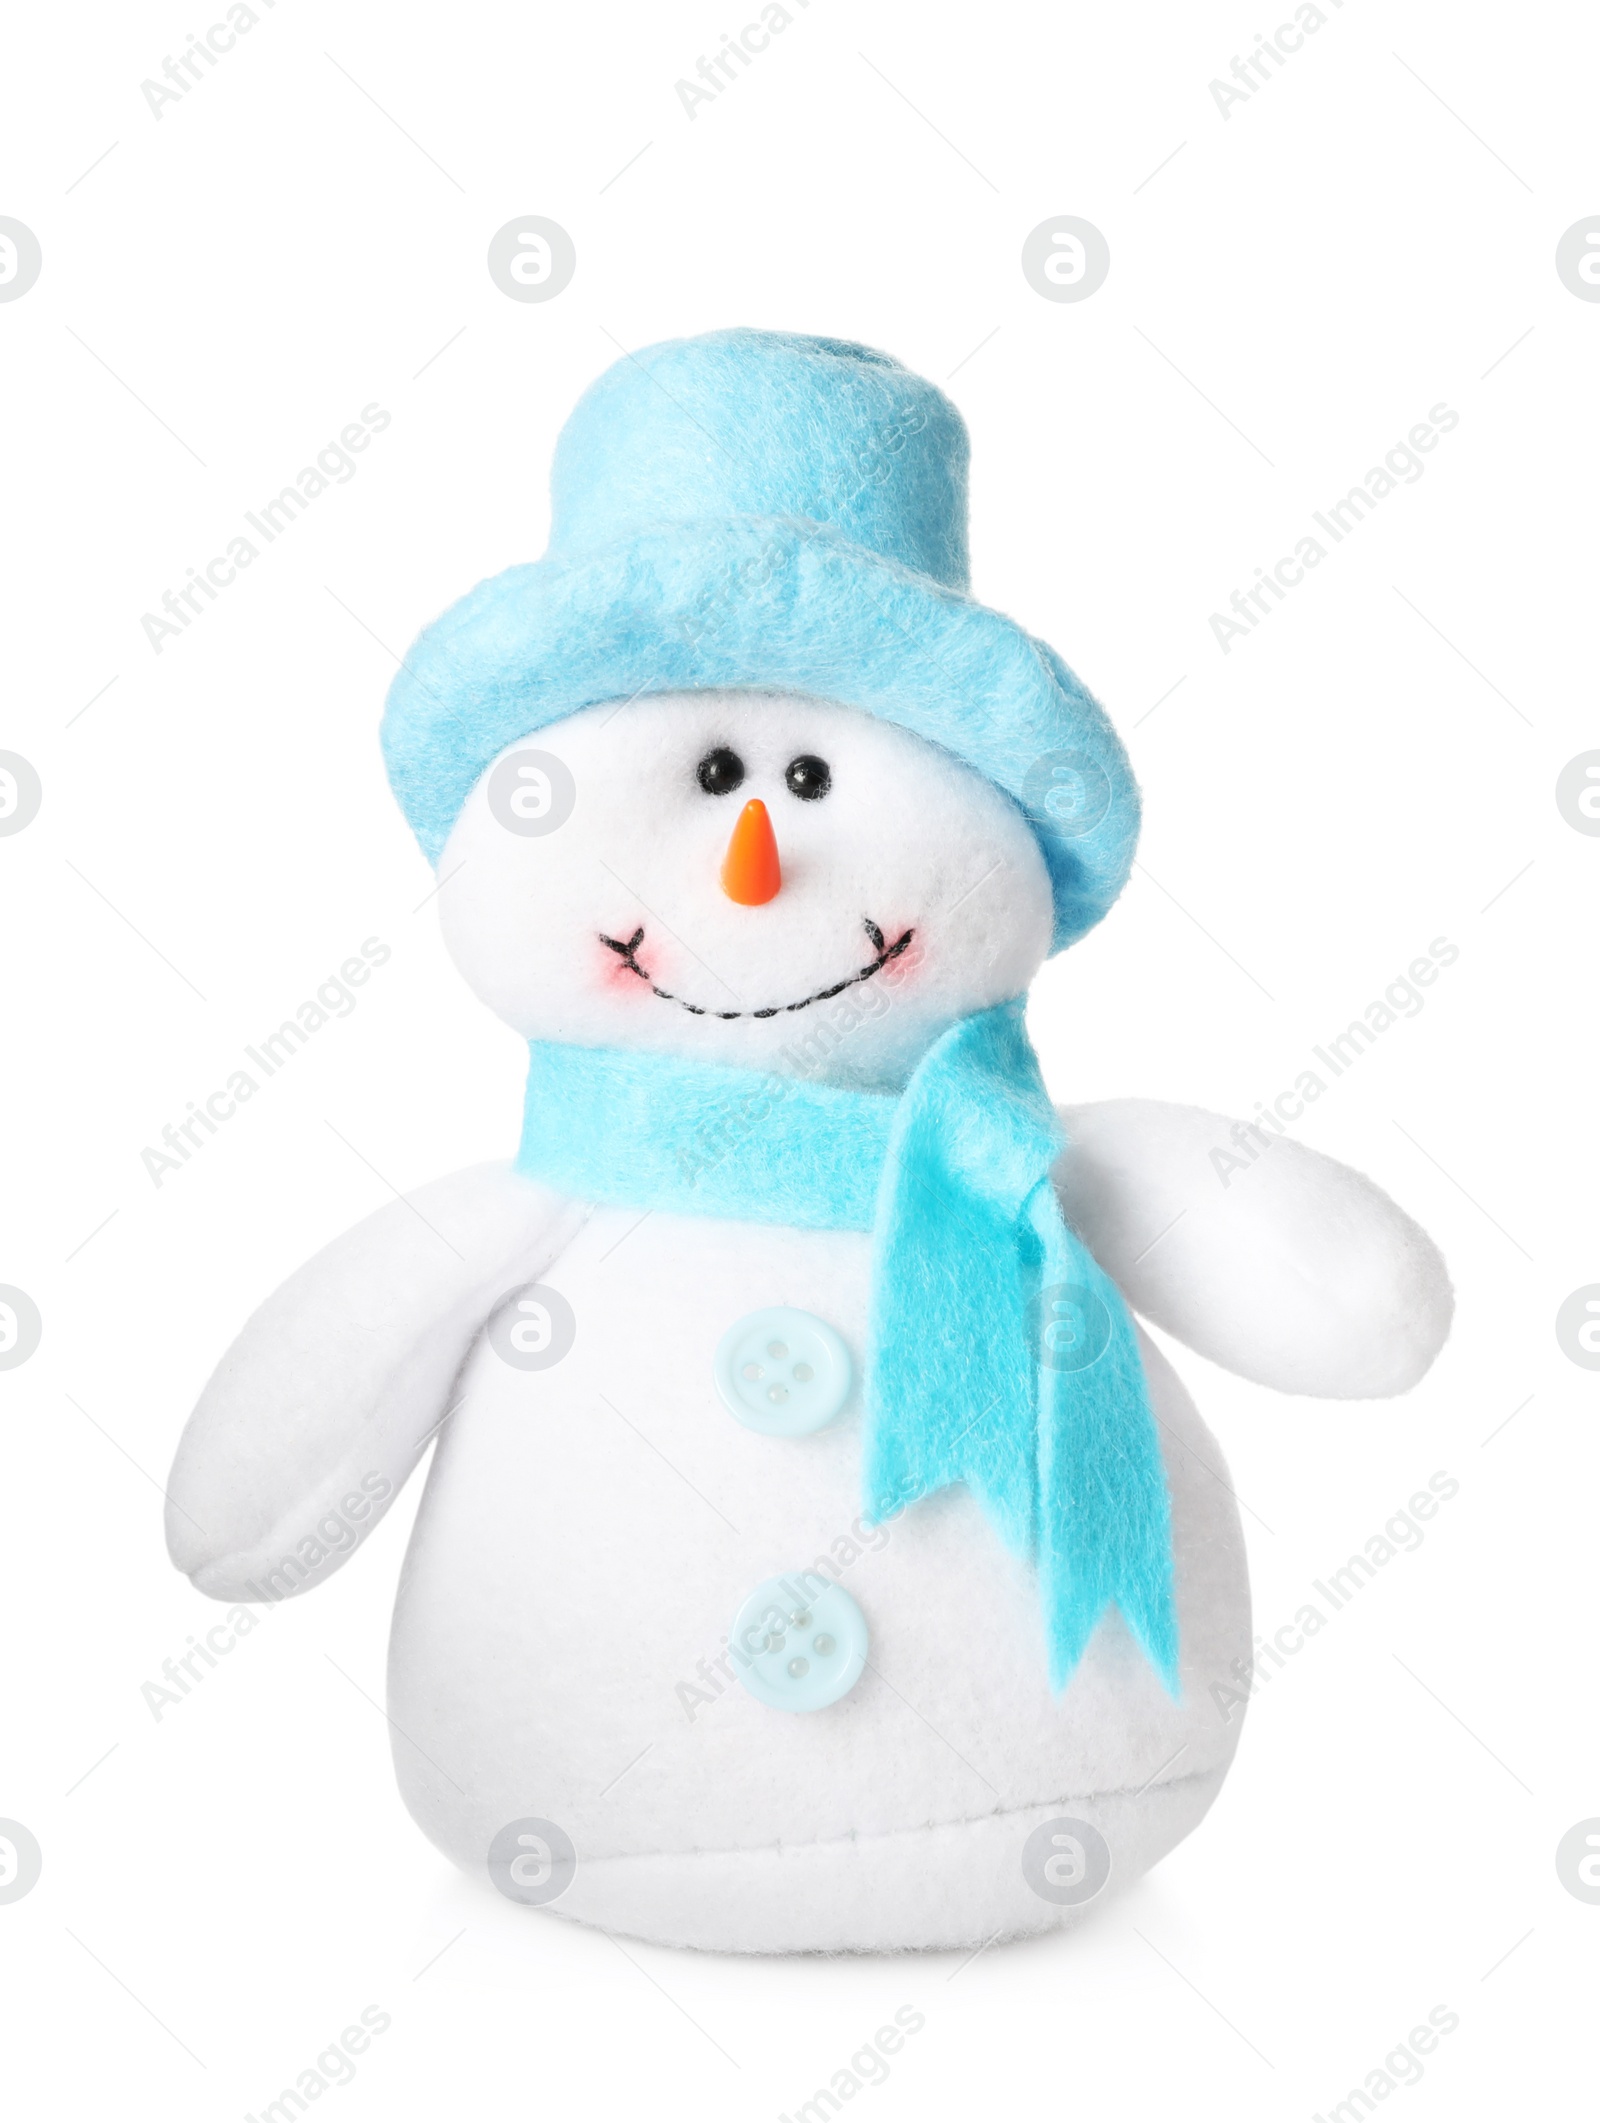 Photo of Cute decorative handmade snowman isolated on white